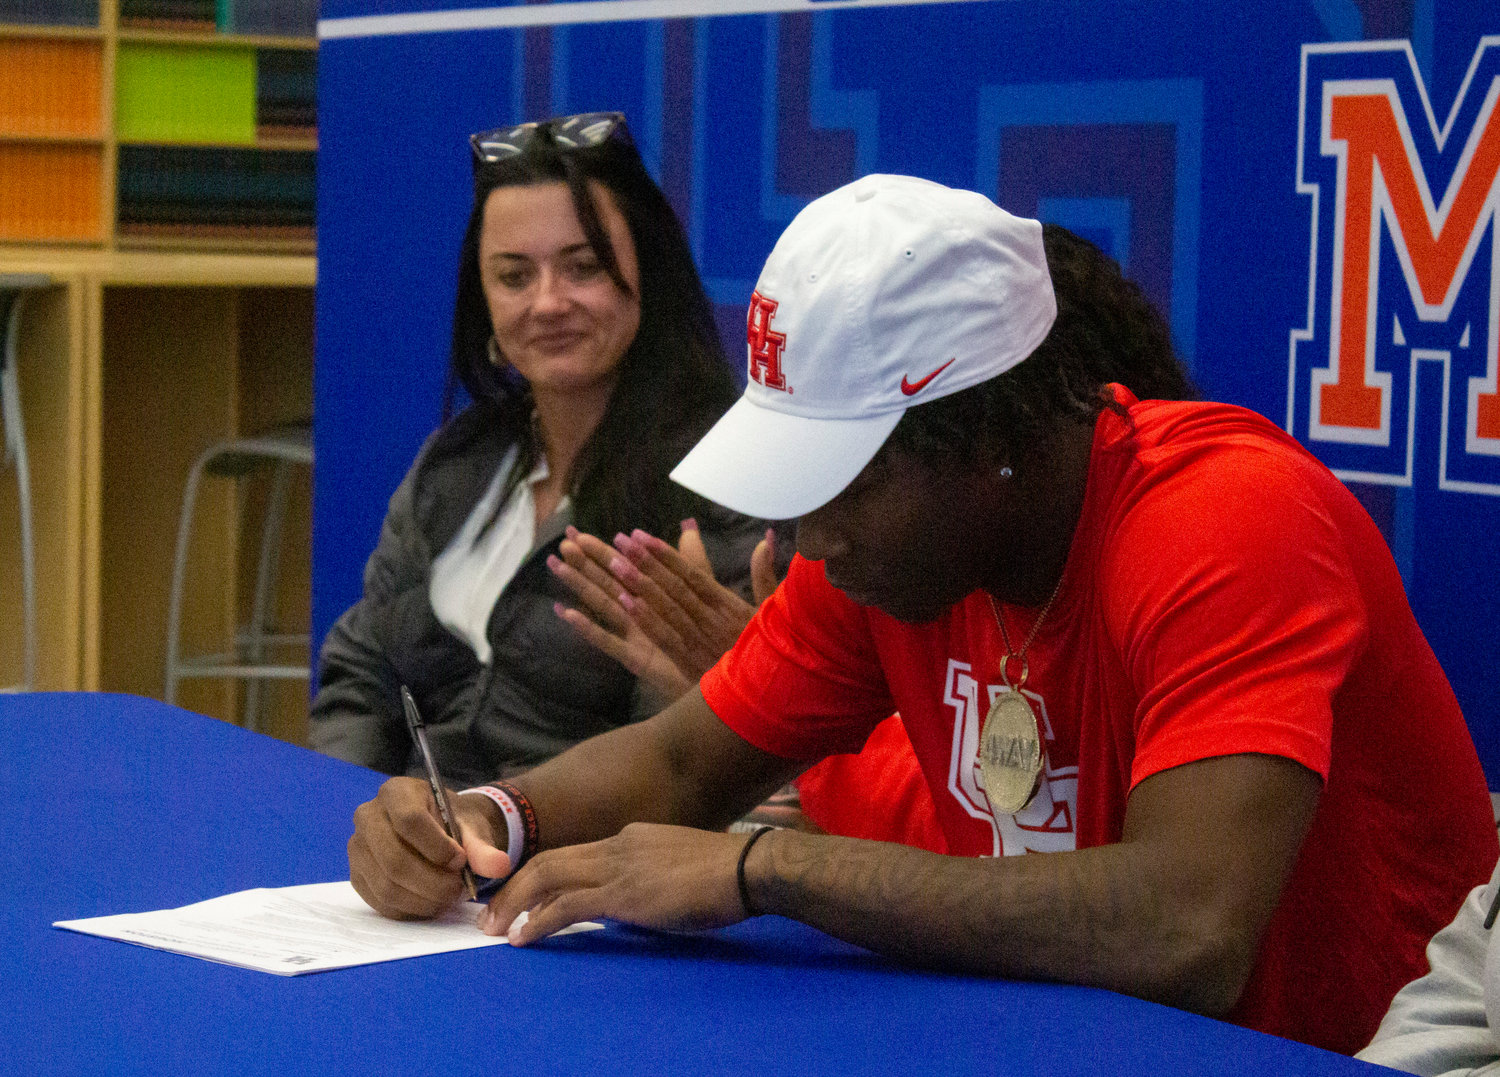 Orange Beach senior Chris Pearson puts pen to paper to confirm his commitment to the Houston Cougar football team during a Wednesday ceremony at the high school. Pearson became the first college football signee in Mako history.